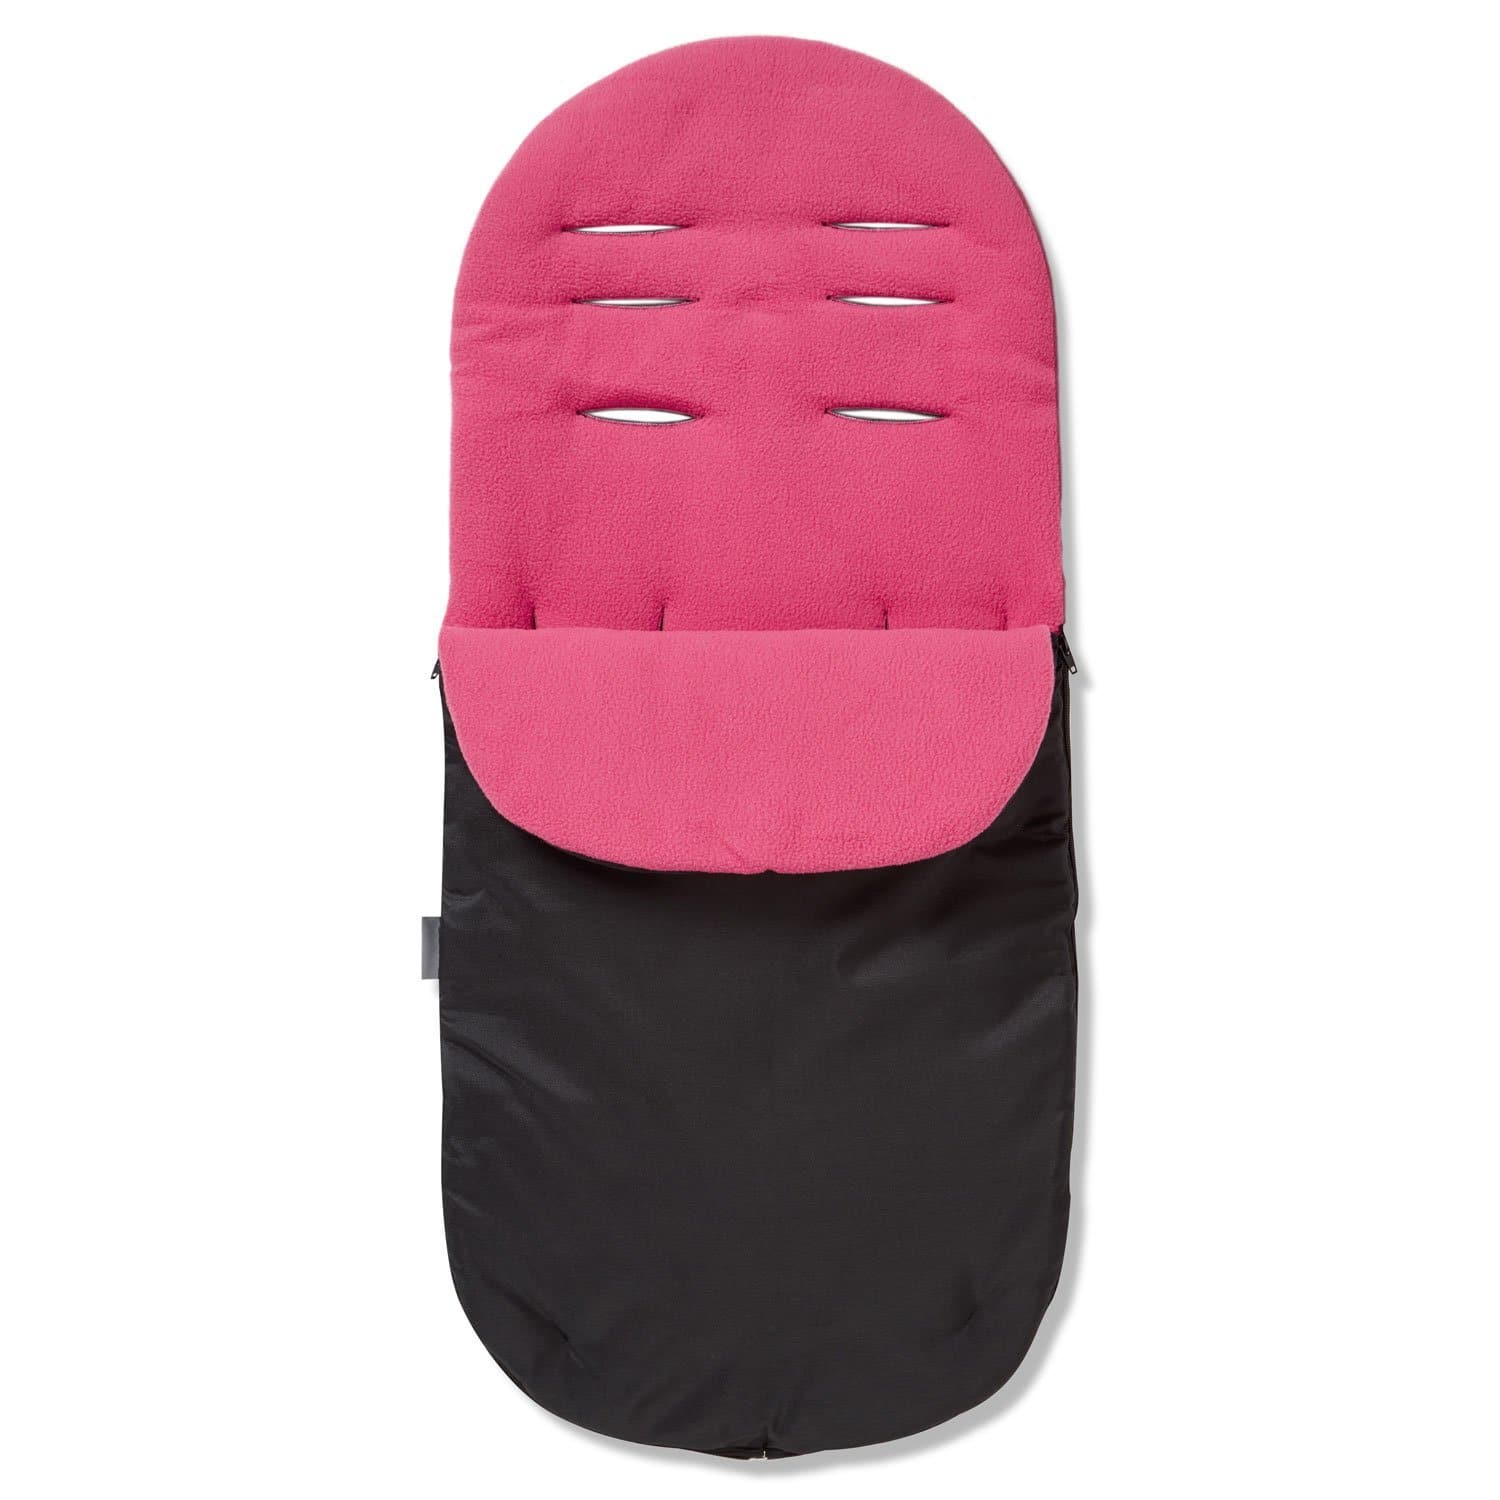 Footmuff / Cosy Toes Compatible with ABC Design - Dark Pink / Fits All Models | For Your Little One